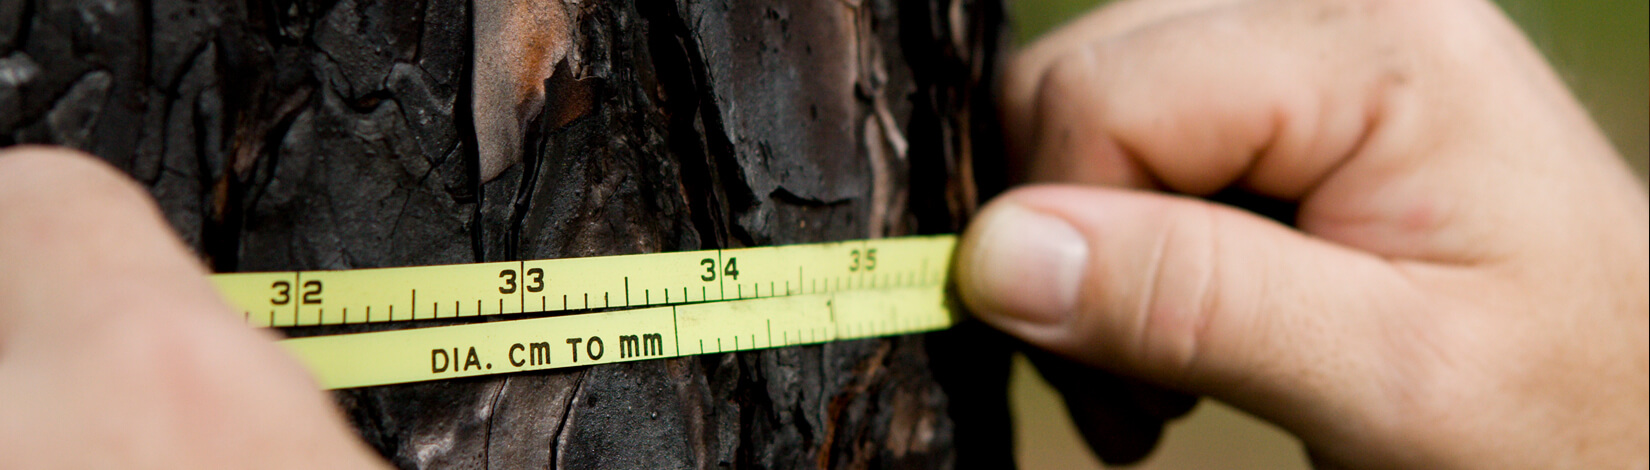 hands measuring a tree with a tape measure